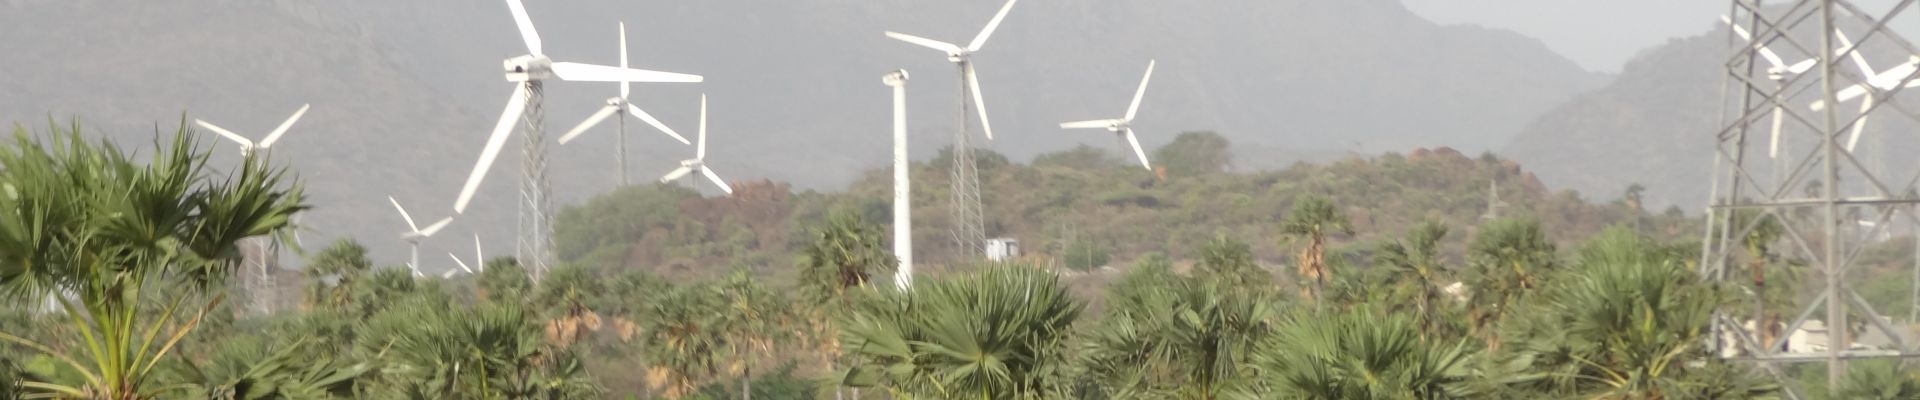 Wind turbines in India can provide ancillary services